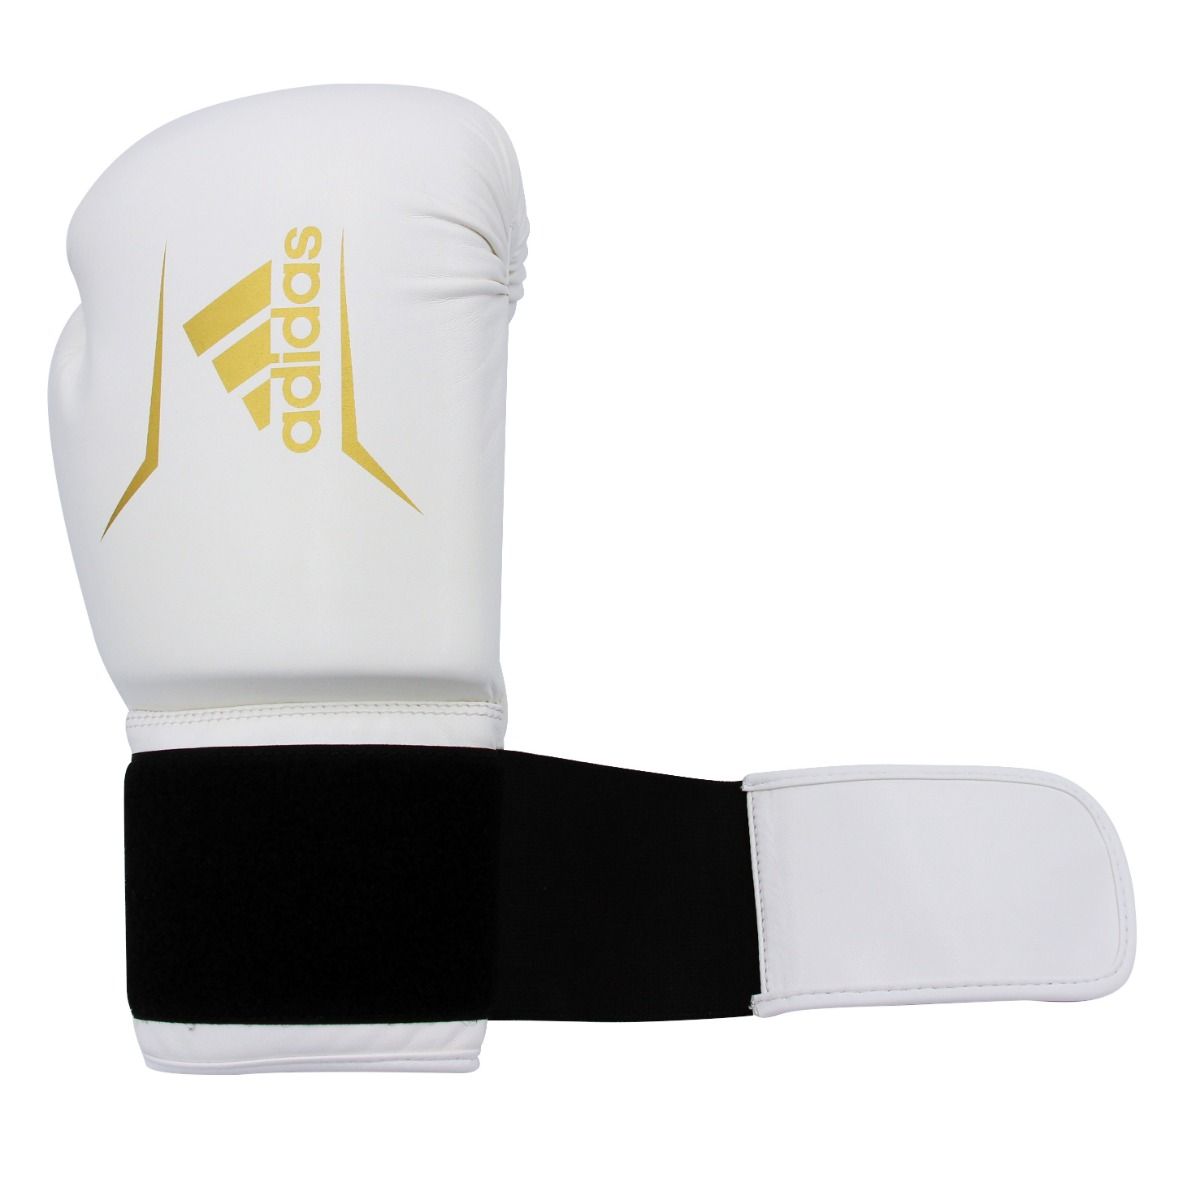 ADIDAS SPEED 50 BOXING GLOVES